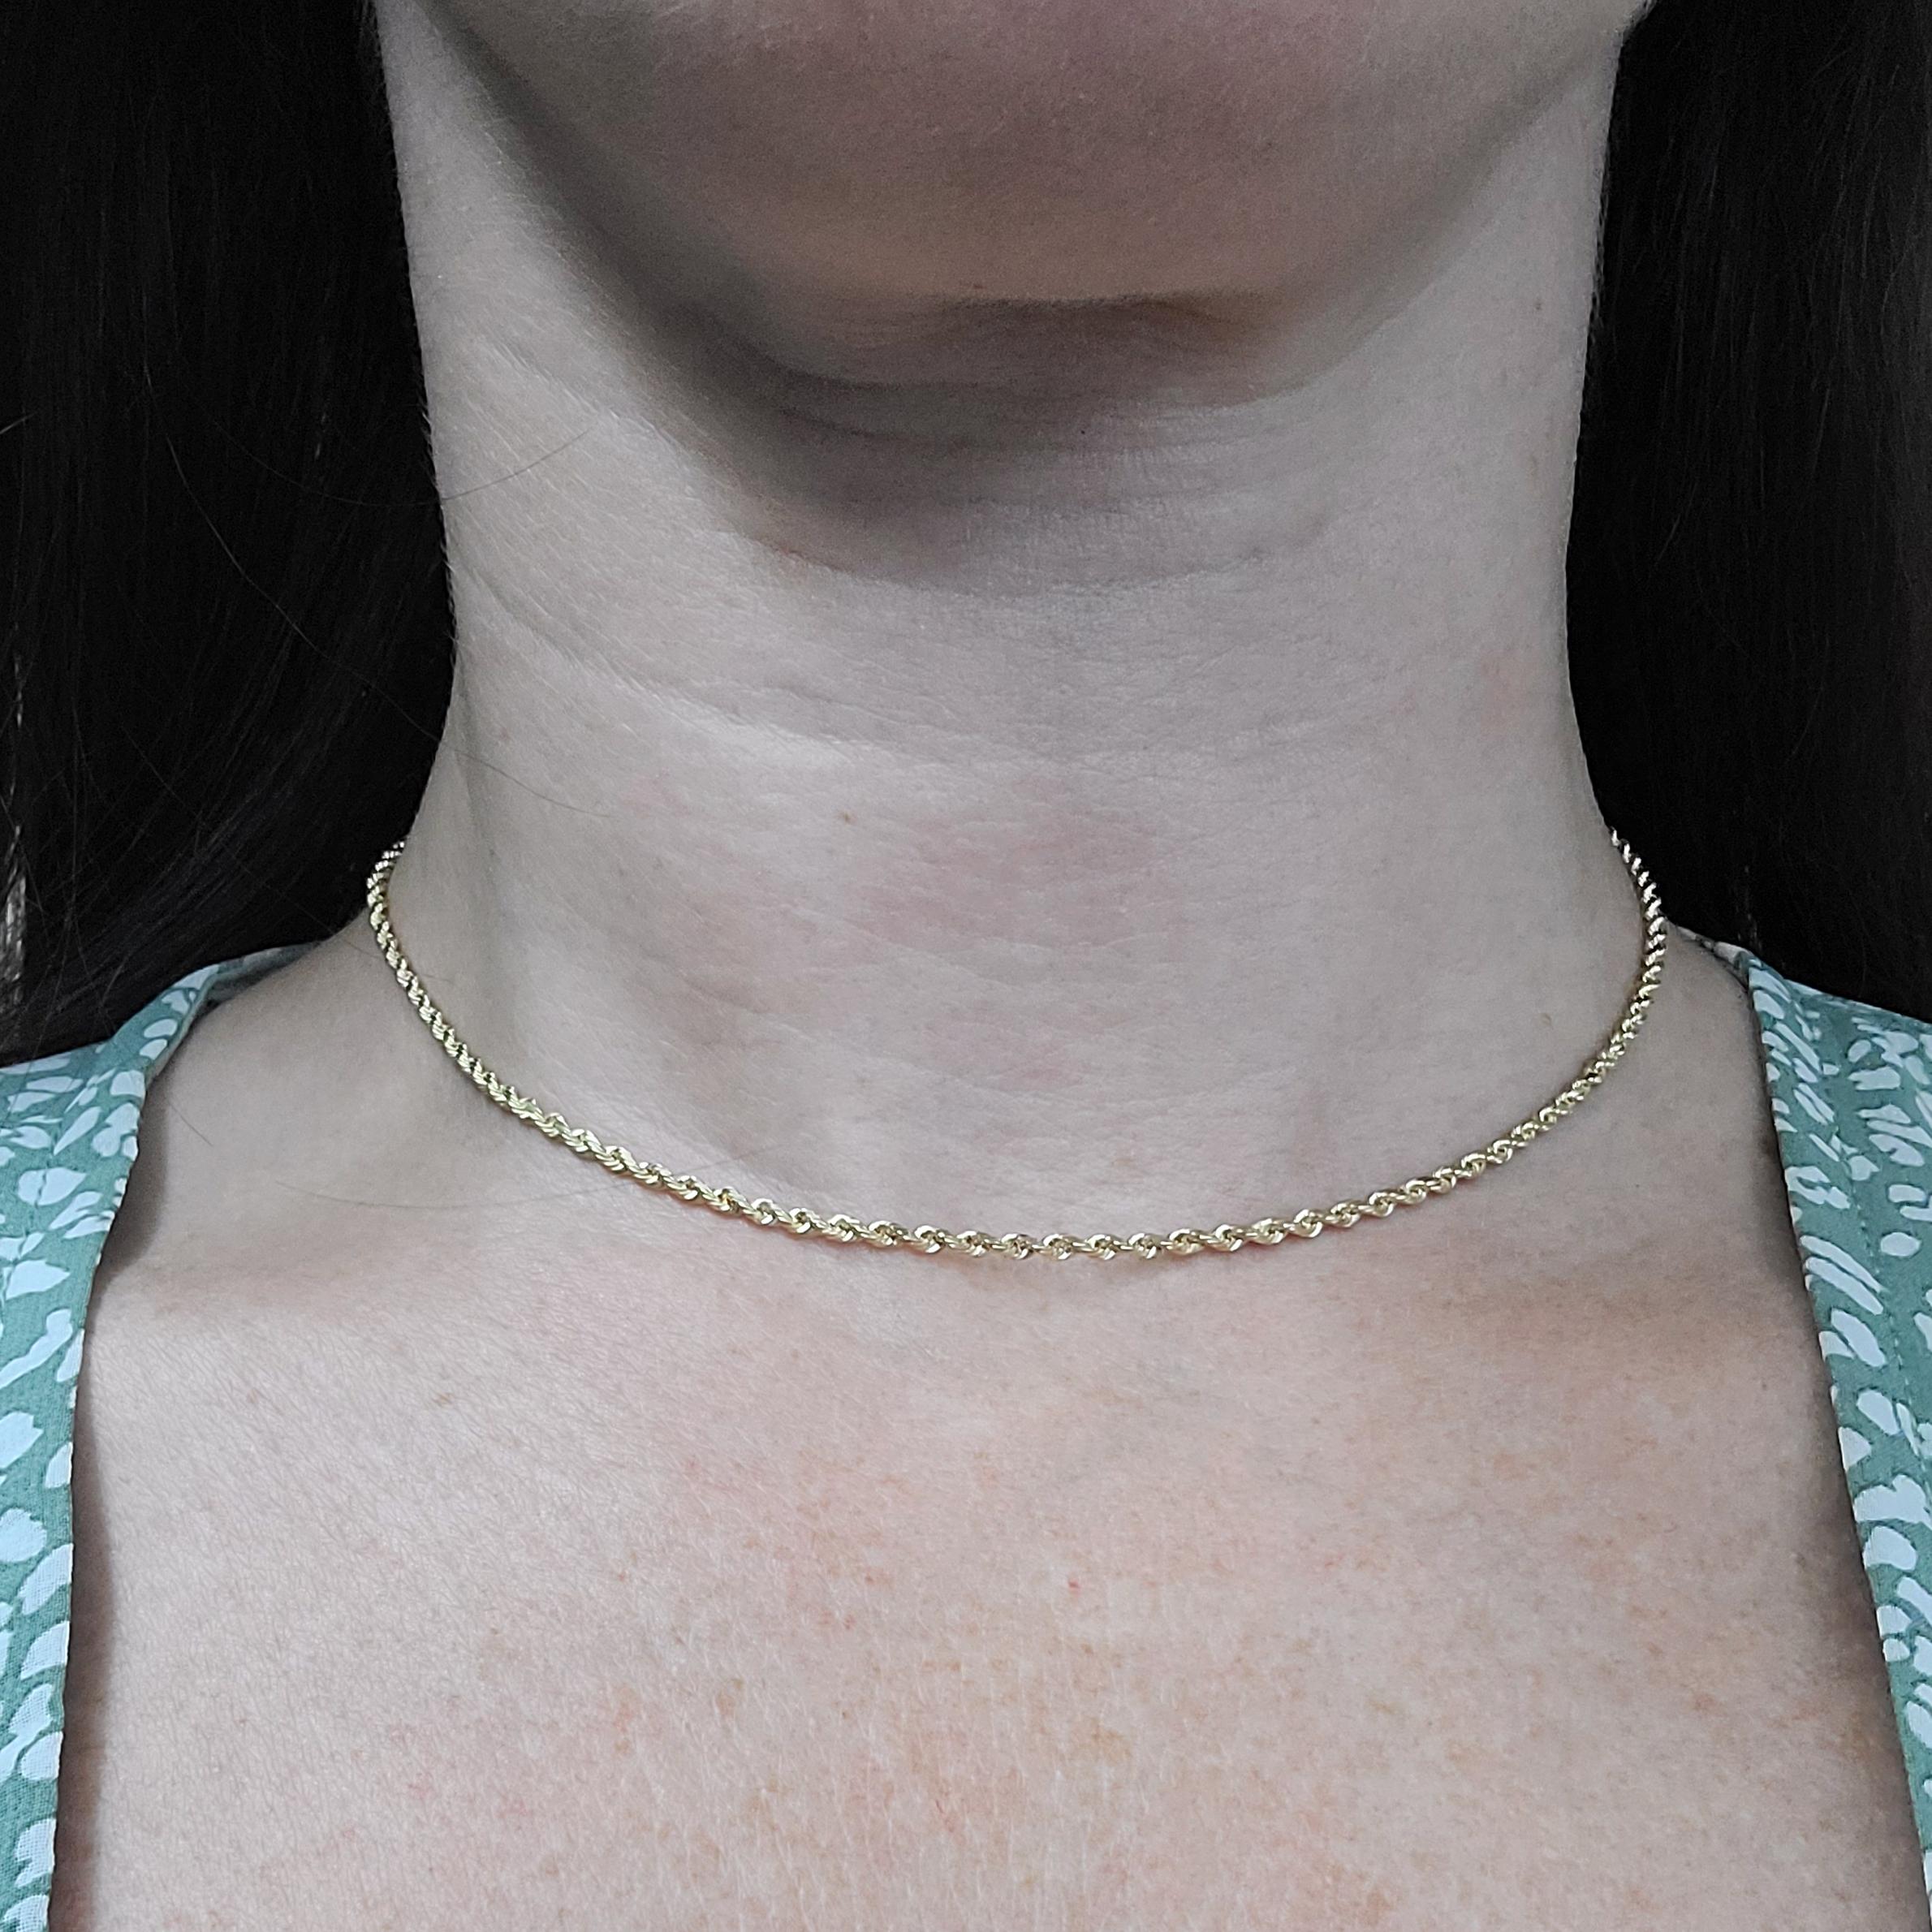 14 Karat Yellow Gold 2mm Rope Chain Choker Necklace Measuring 13 Inches Long With Tube Clasp & Figure 8 Safety. Finished Weight Is 4.7 Grams.